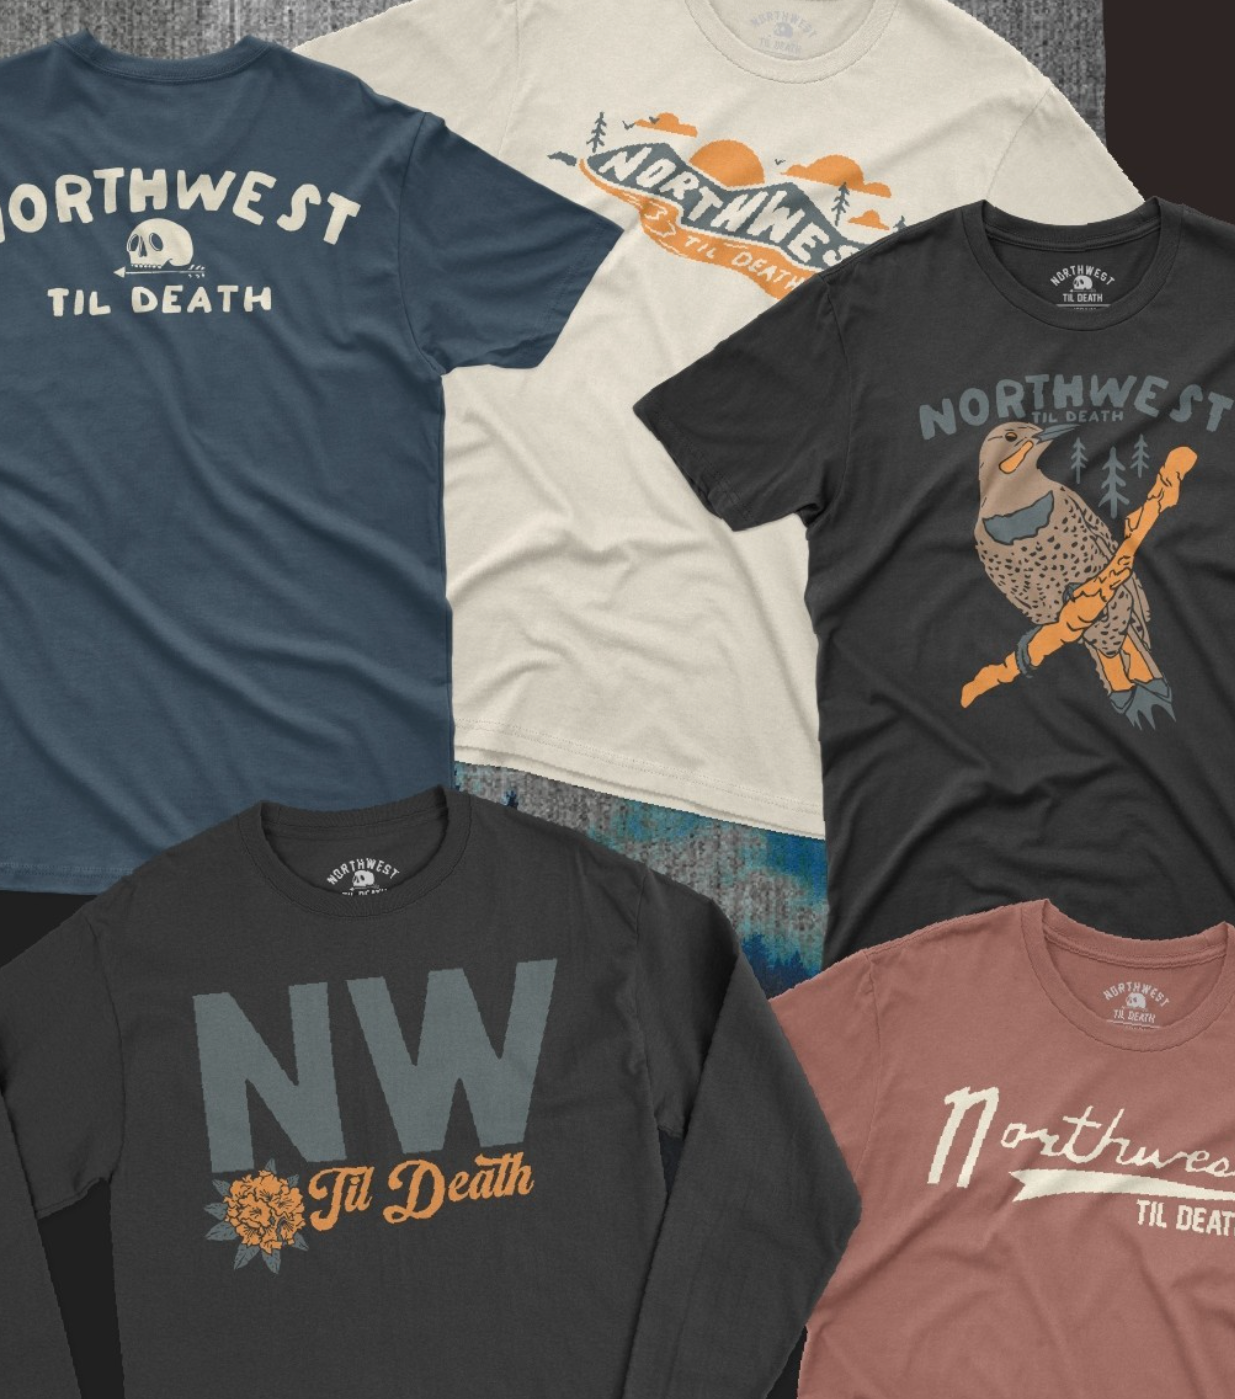 Gear Up for Adventure with Our Latest Northwest Til Death Shirts!